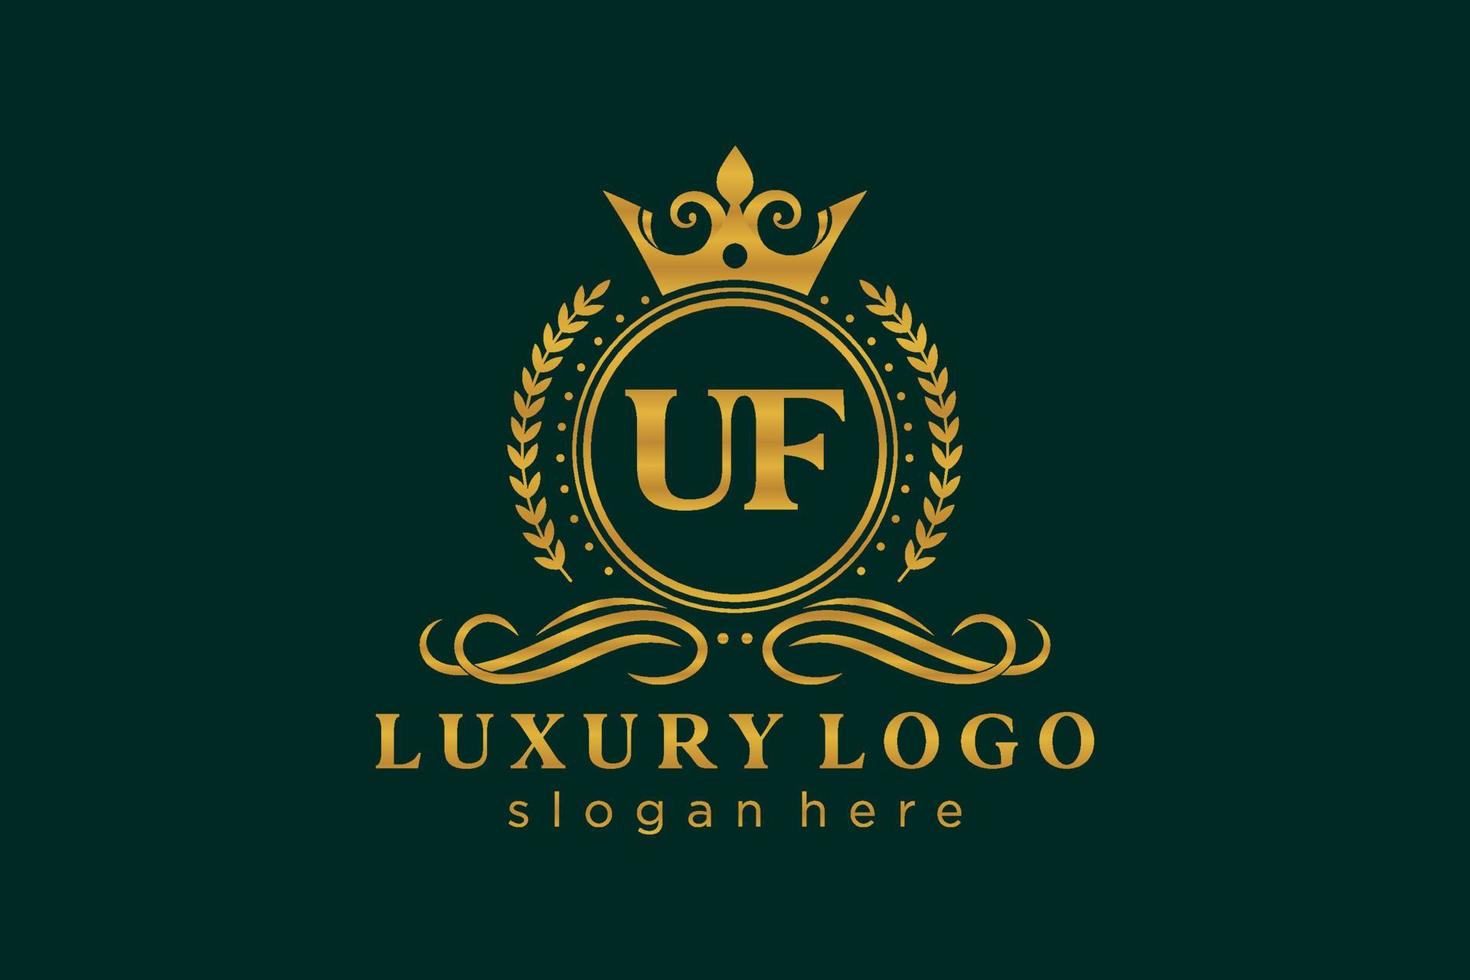 Initial UF Letter Royal Luxury Logo template in vector art for Restaurant, Royalty, Boutique, Cafe, Hotel, Heraldic, Jewelry, Fashion and other vector illustration.